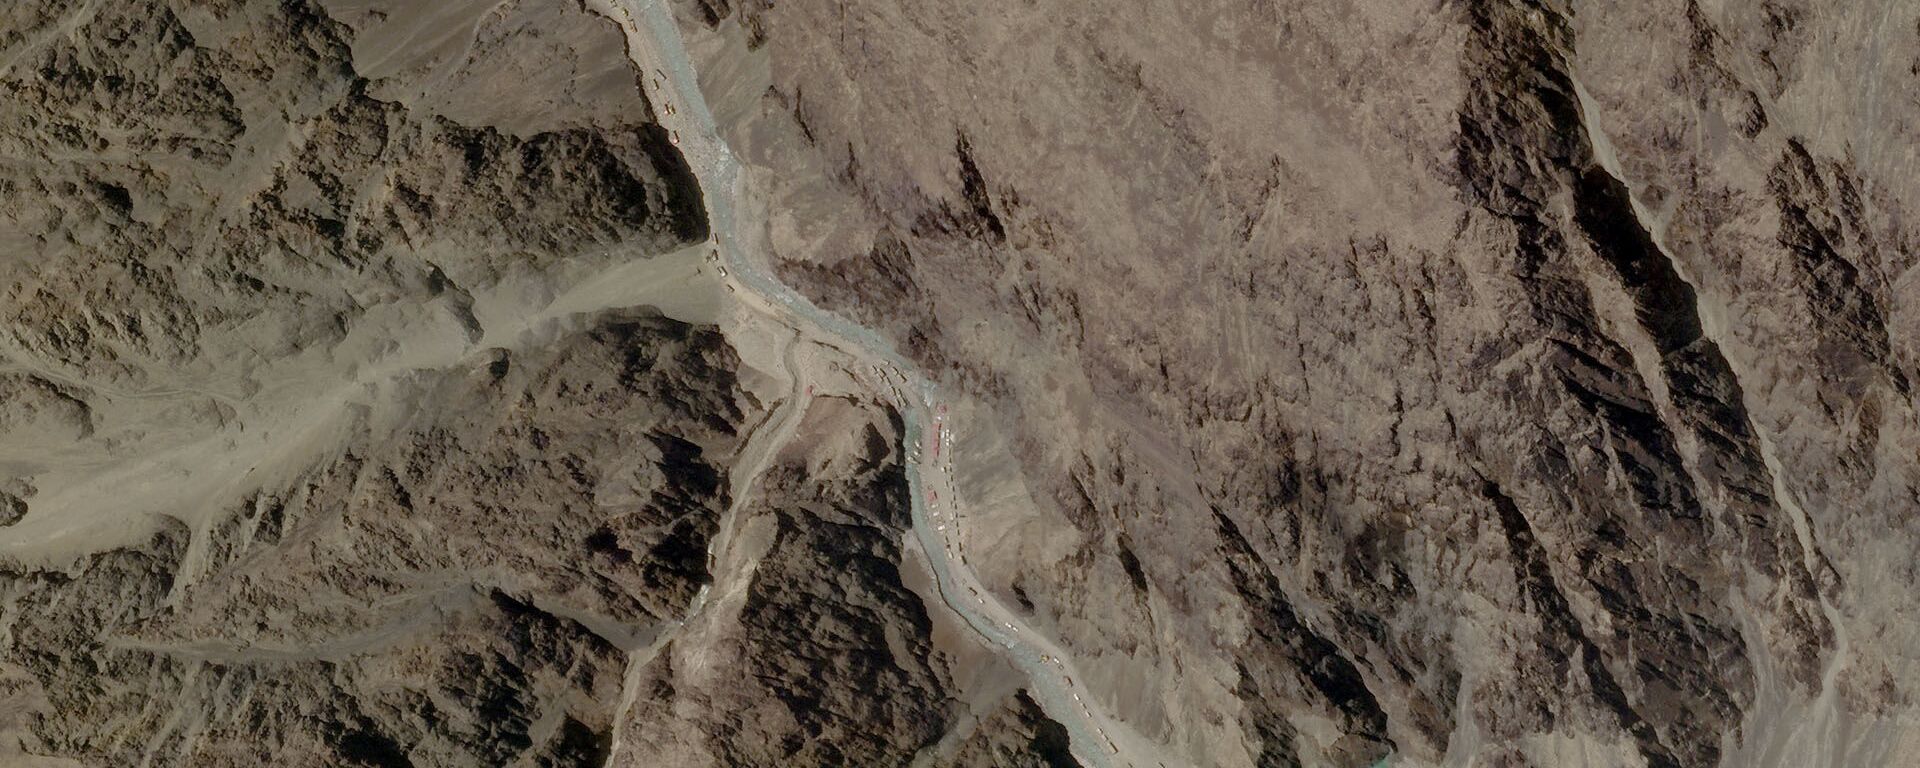 A satellite image taken over Galwan Valley in Ladakh, India, parts of which are contested with China - Sputnik International, 1920, 24.06.2020